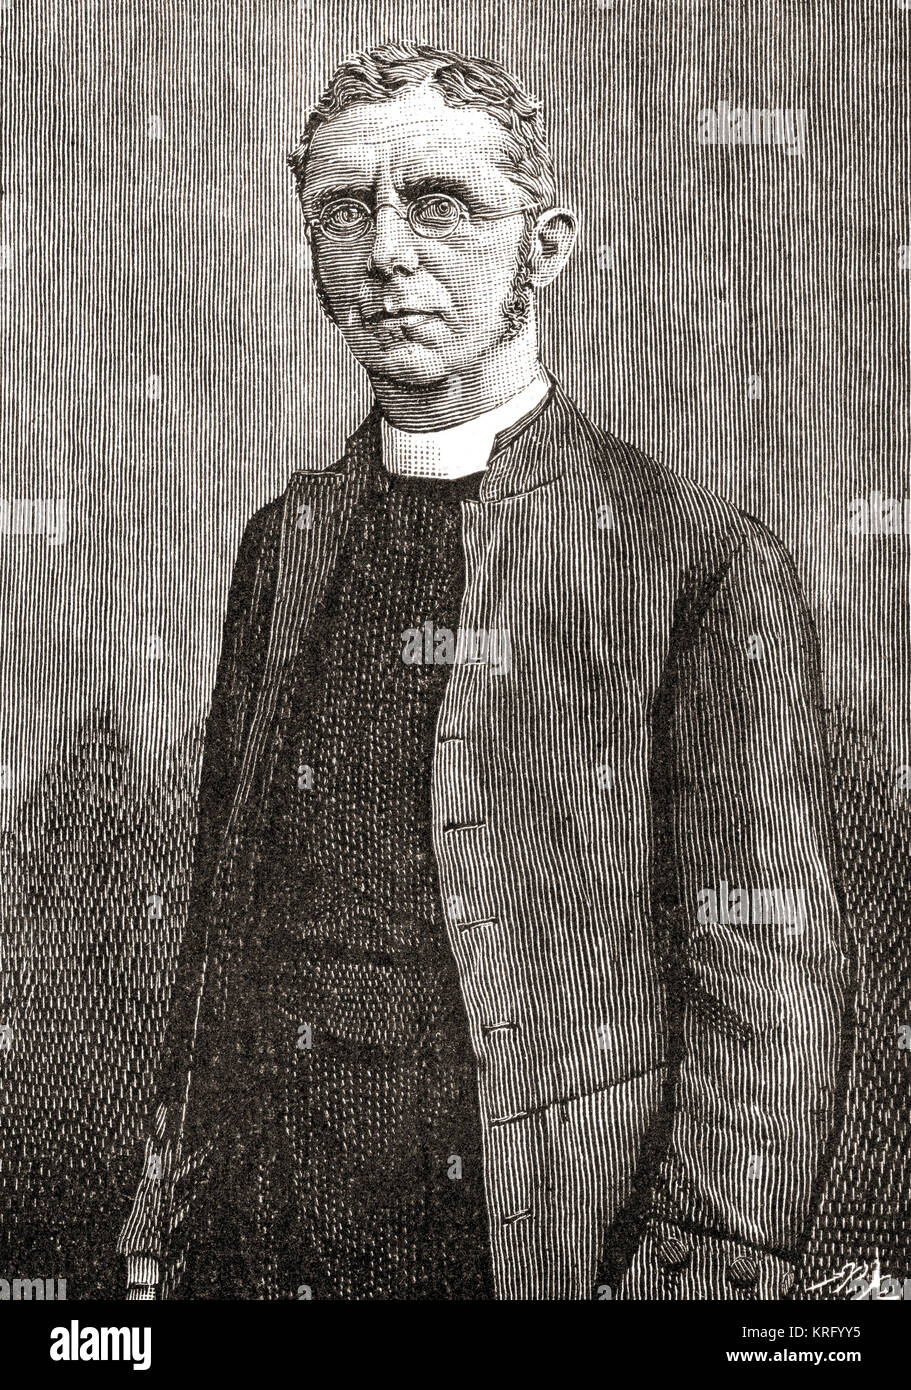 Augustus Legge, 1839 - 1913.  Bishop of Lichfield. Seen here aged 55. From The Strand Magazine, published January to June 1894. Stock Photo